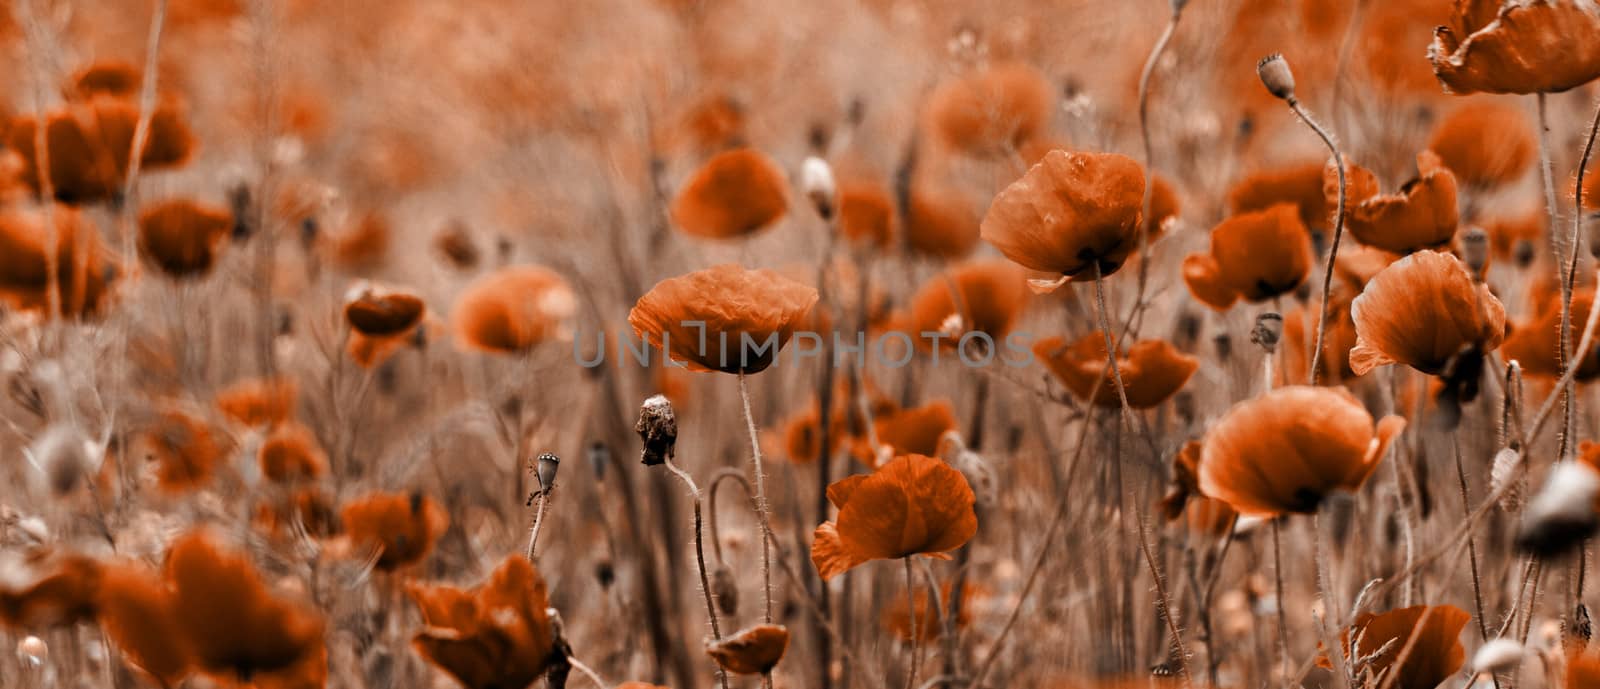 Red poppies blooming in the wild meadow - sepia tone